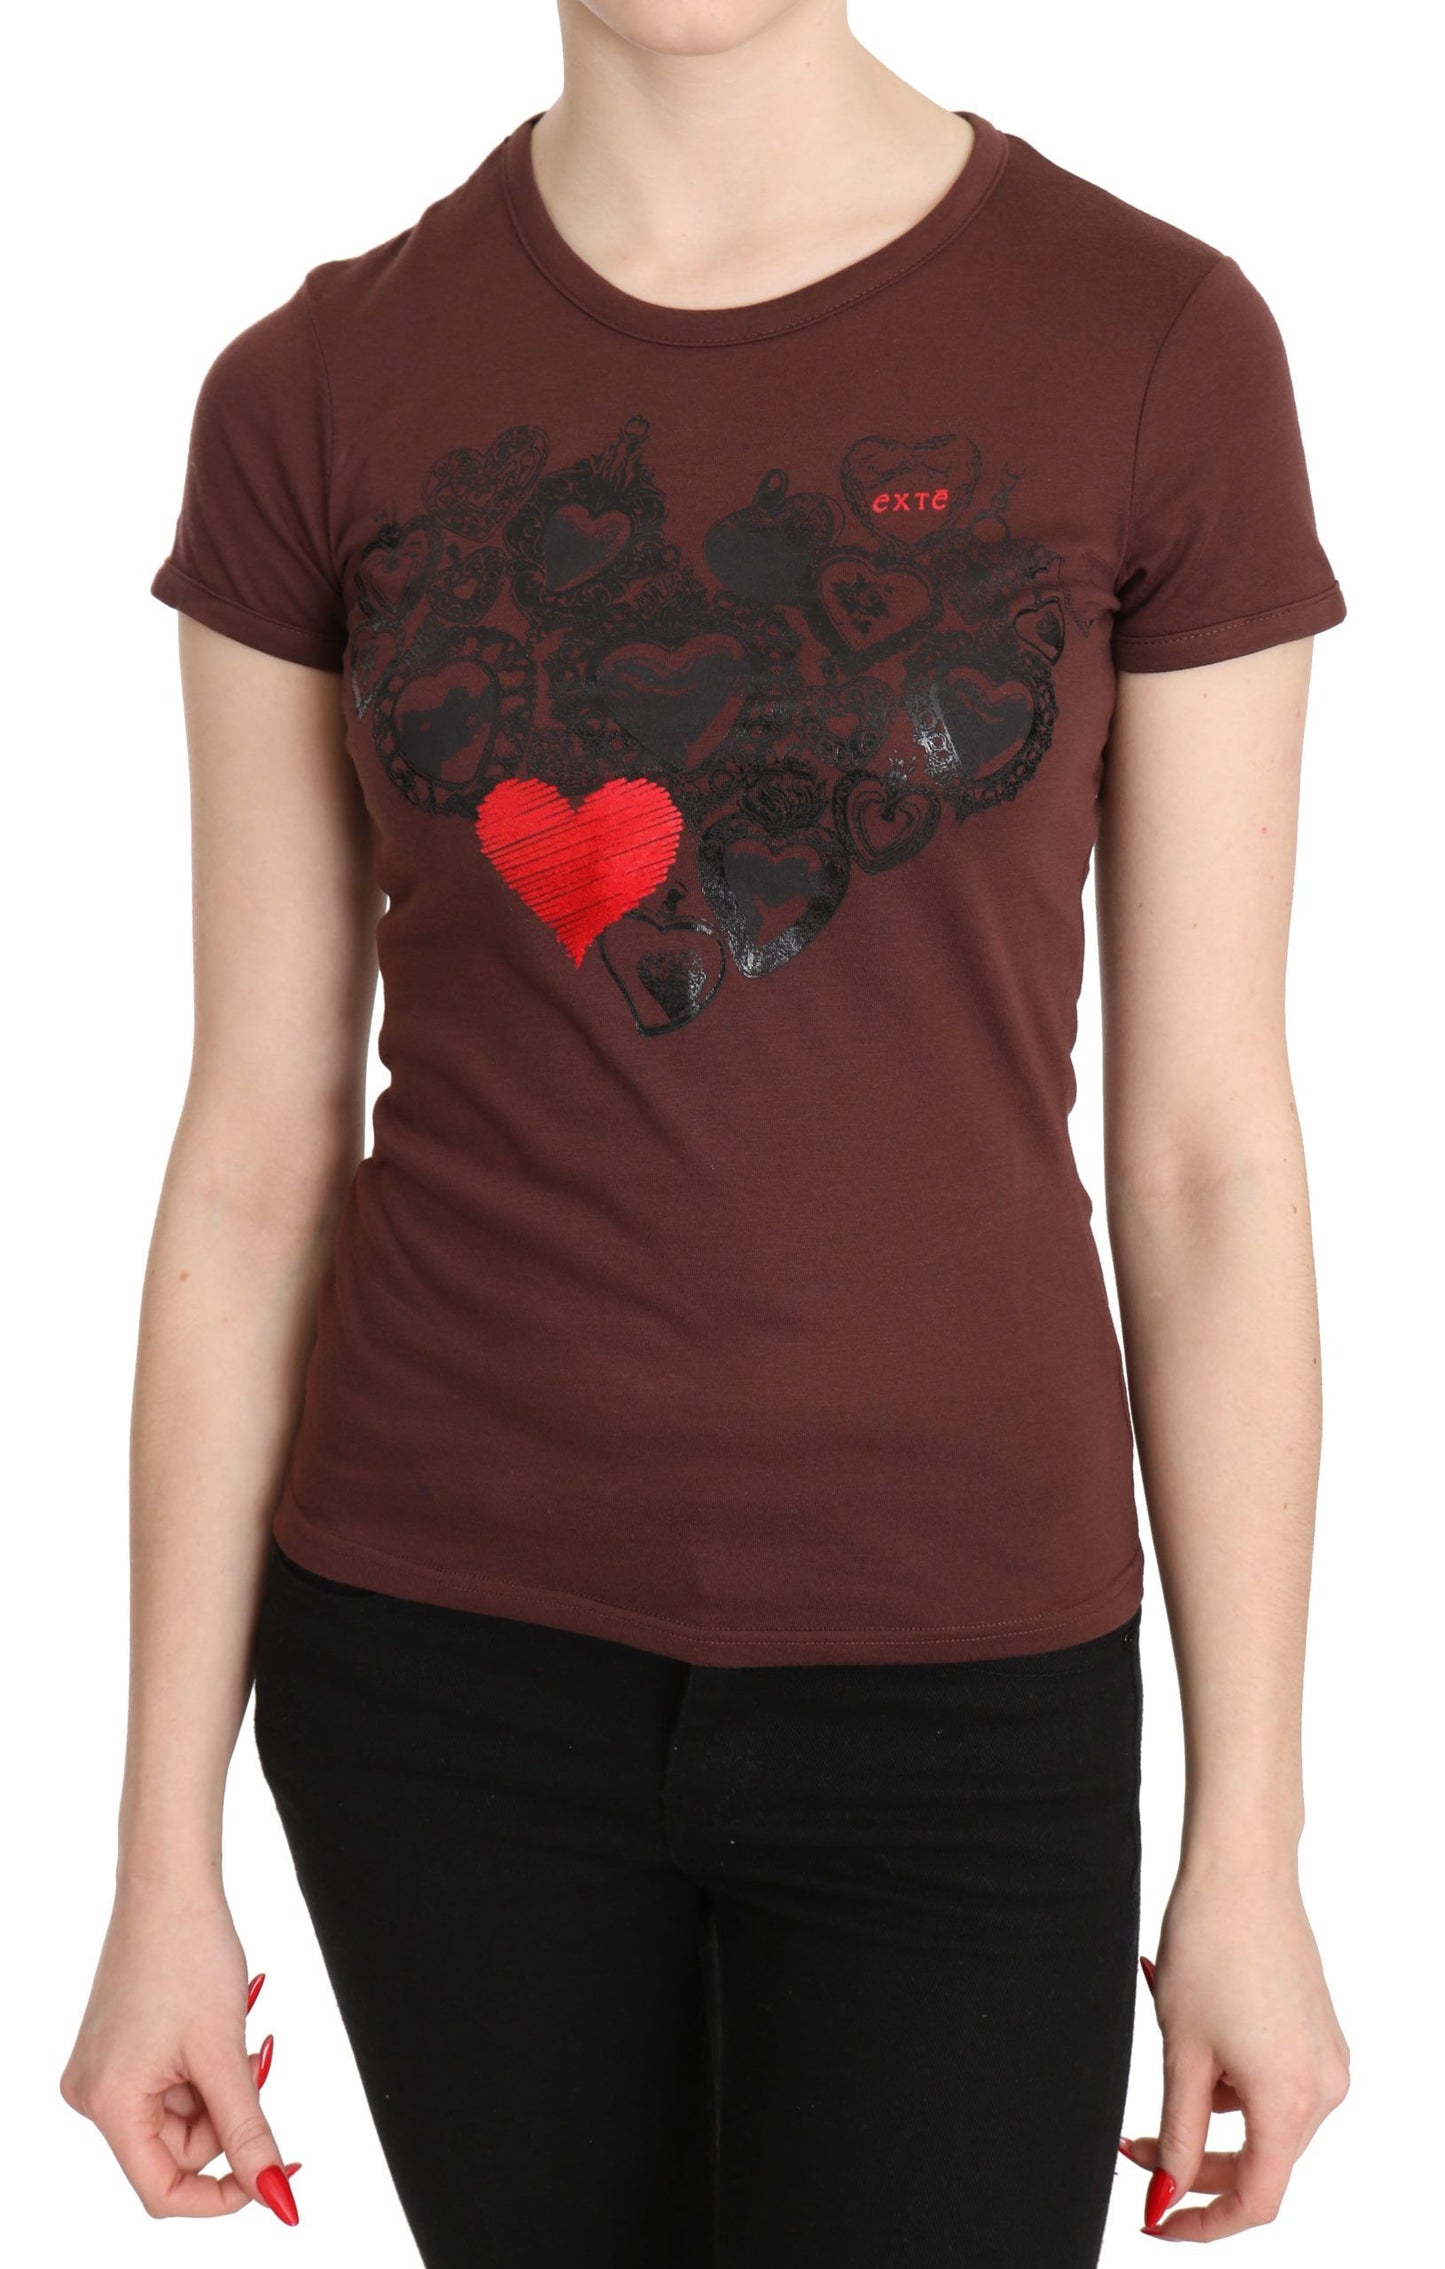 Brown Hearts Printed Round Neck T-shirt Top